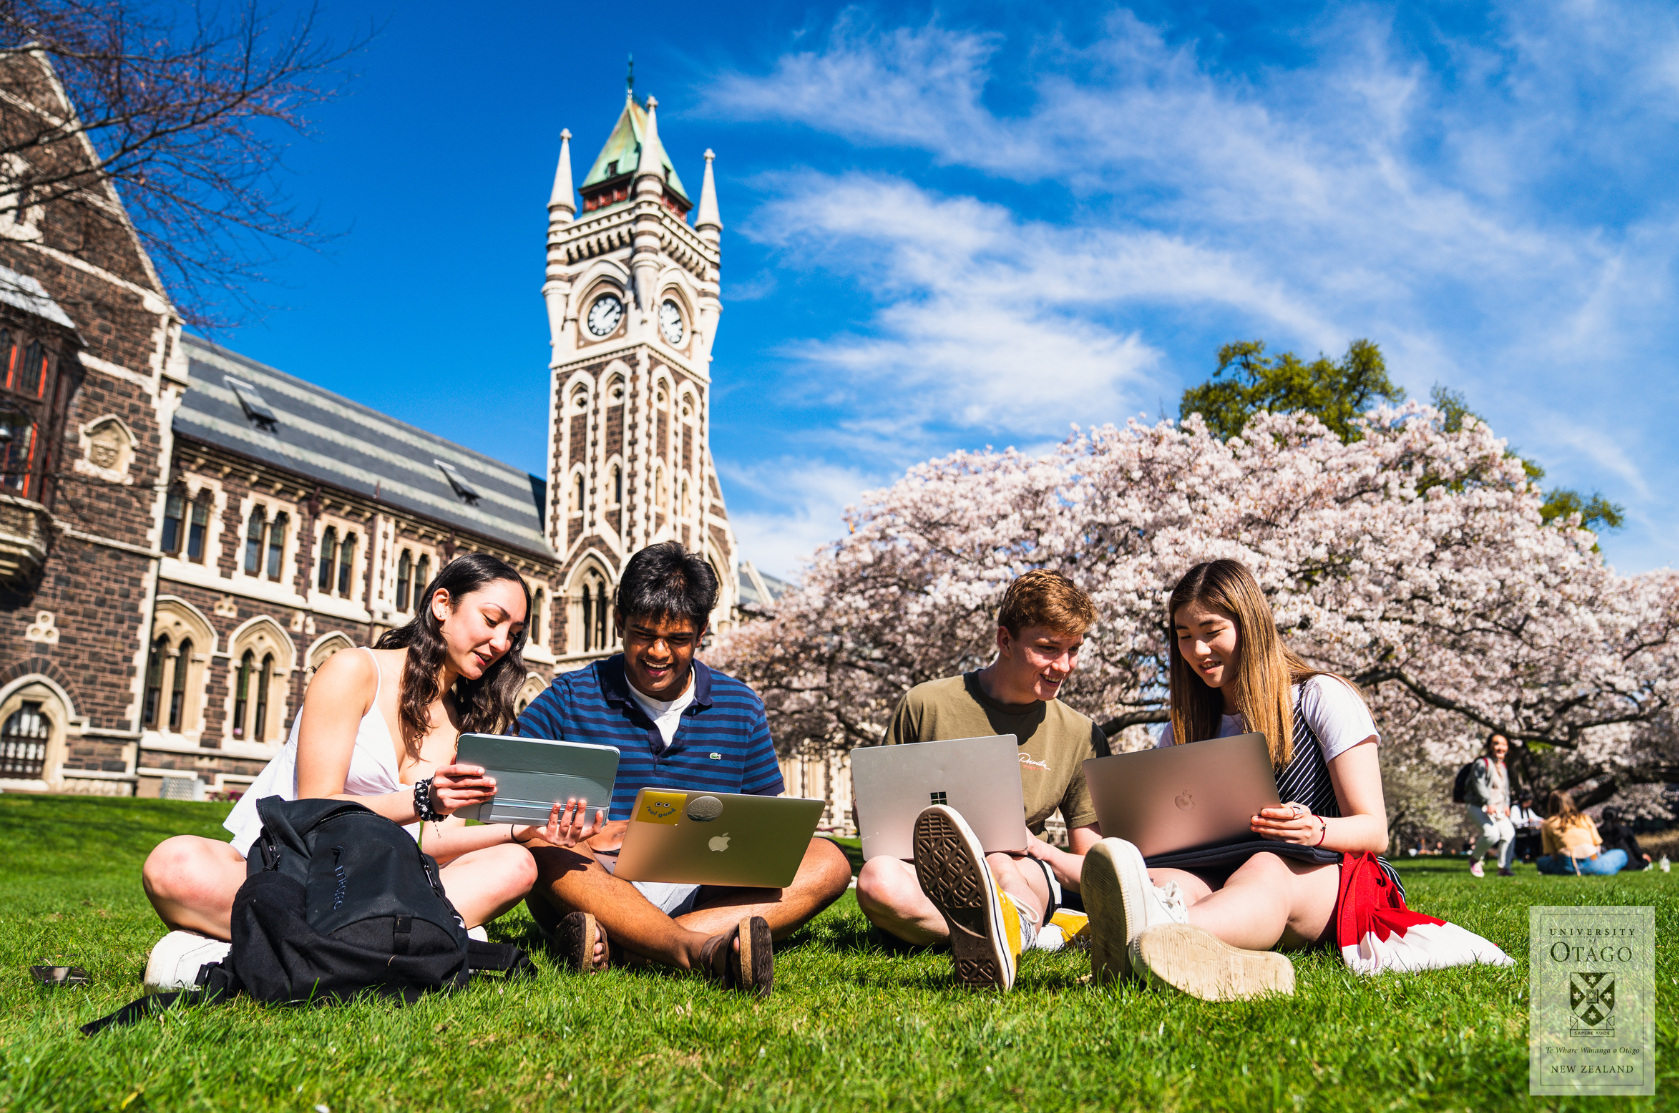 University of Otago China Scholarship Council Doctoral Scholarship: A Great Opportunity for International Students to Study in New Zealand